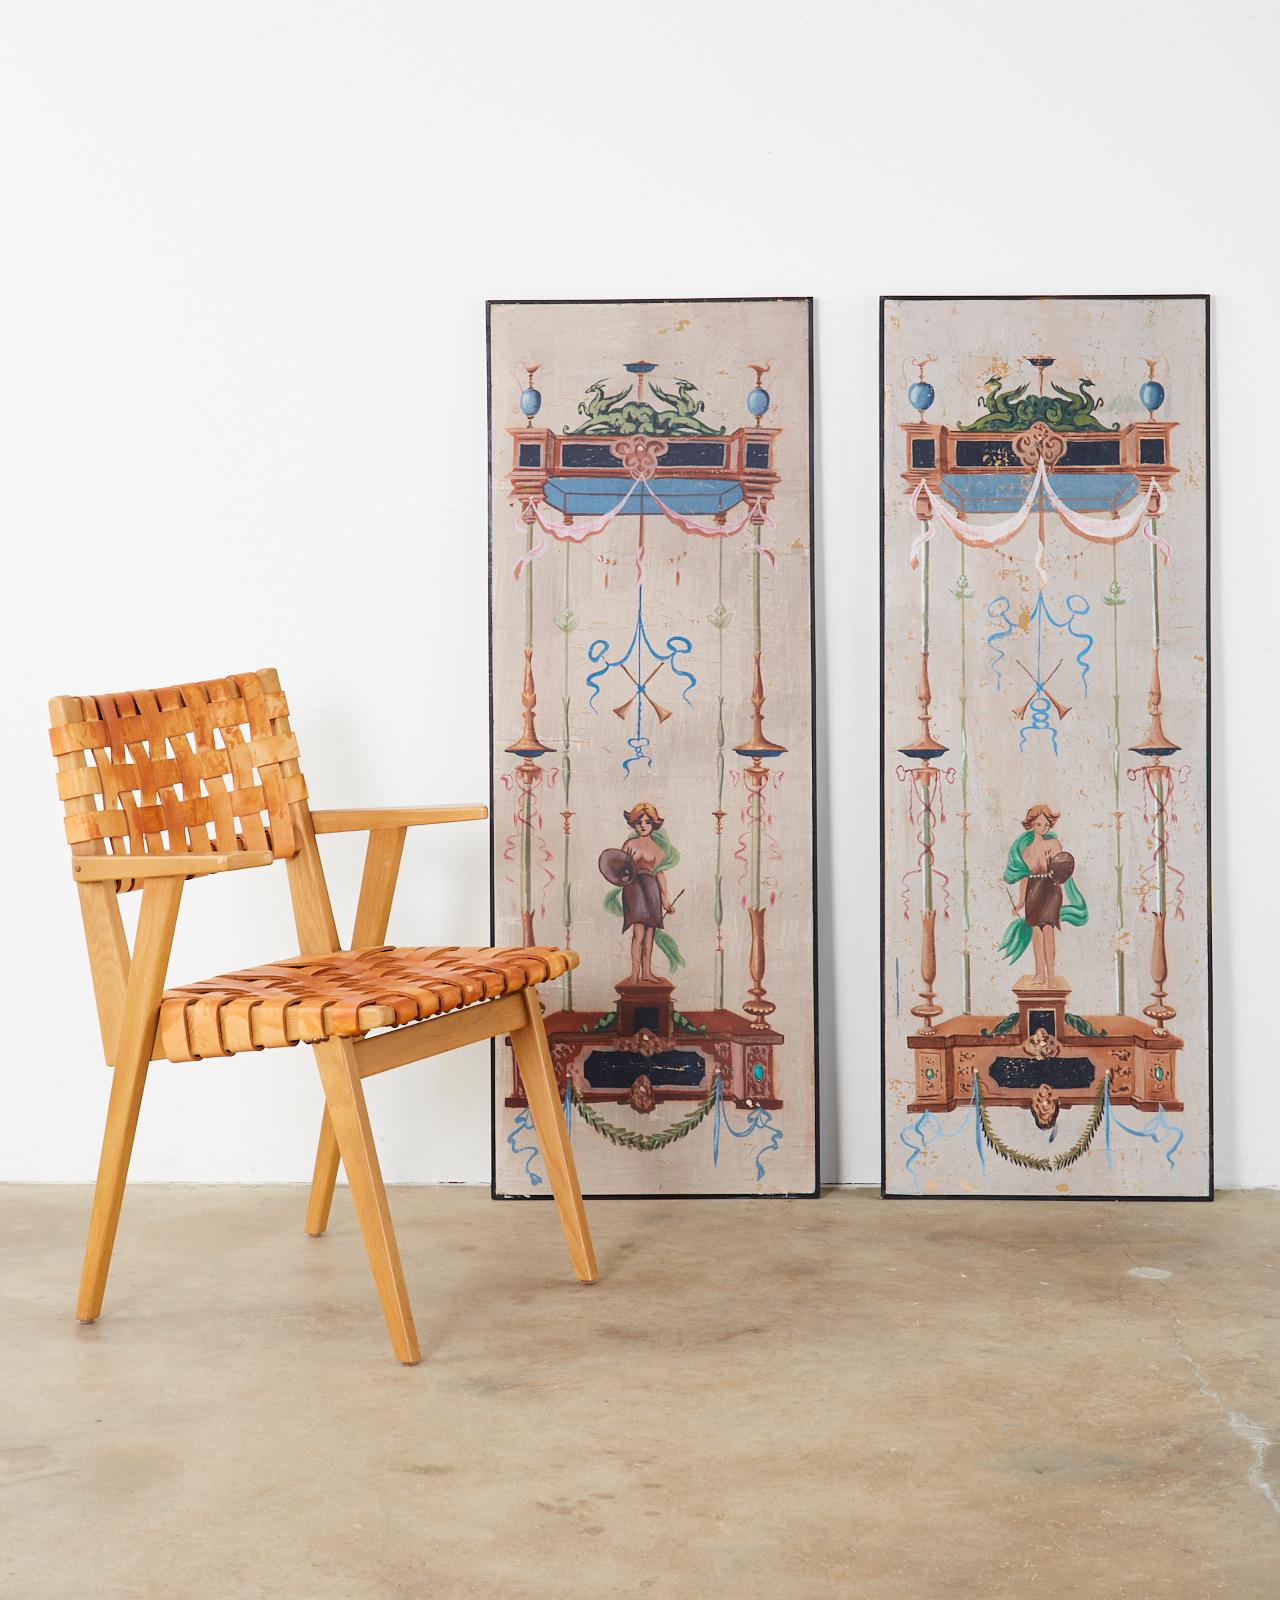 Impressive set of eight hand painted grotesques or wallpaper panels made in the neoclassical Pompeian style. Oil on paper paintings mounted to wood and Masonite panels with an ebonized wood frame. Made in Italy with a beautiful intentionally